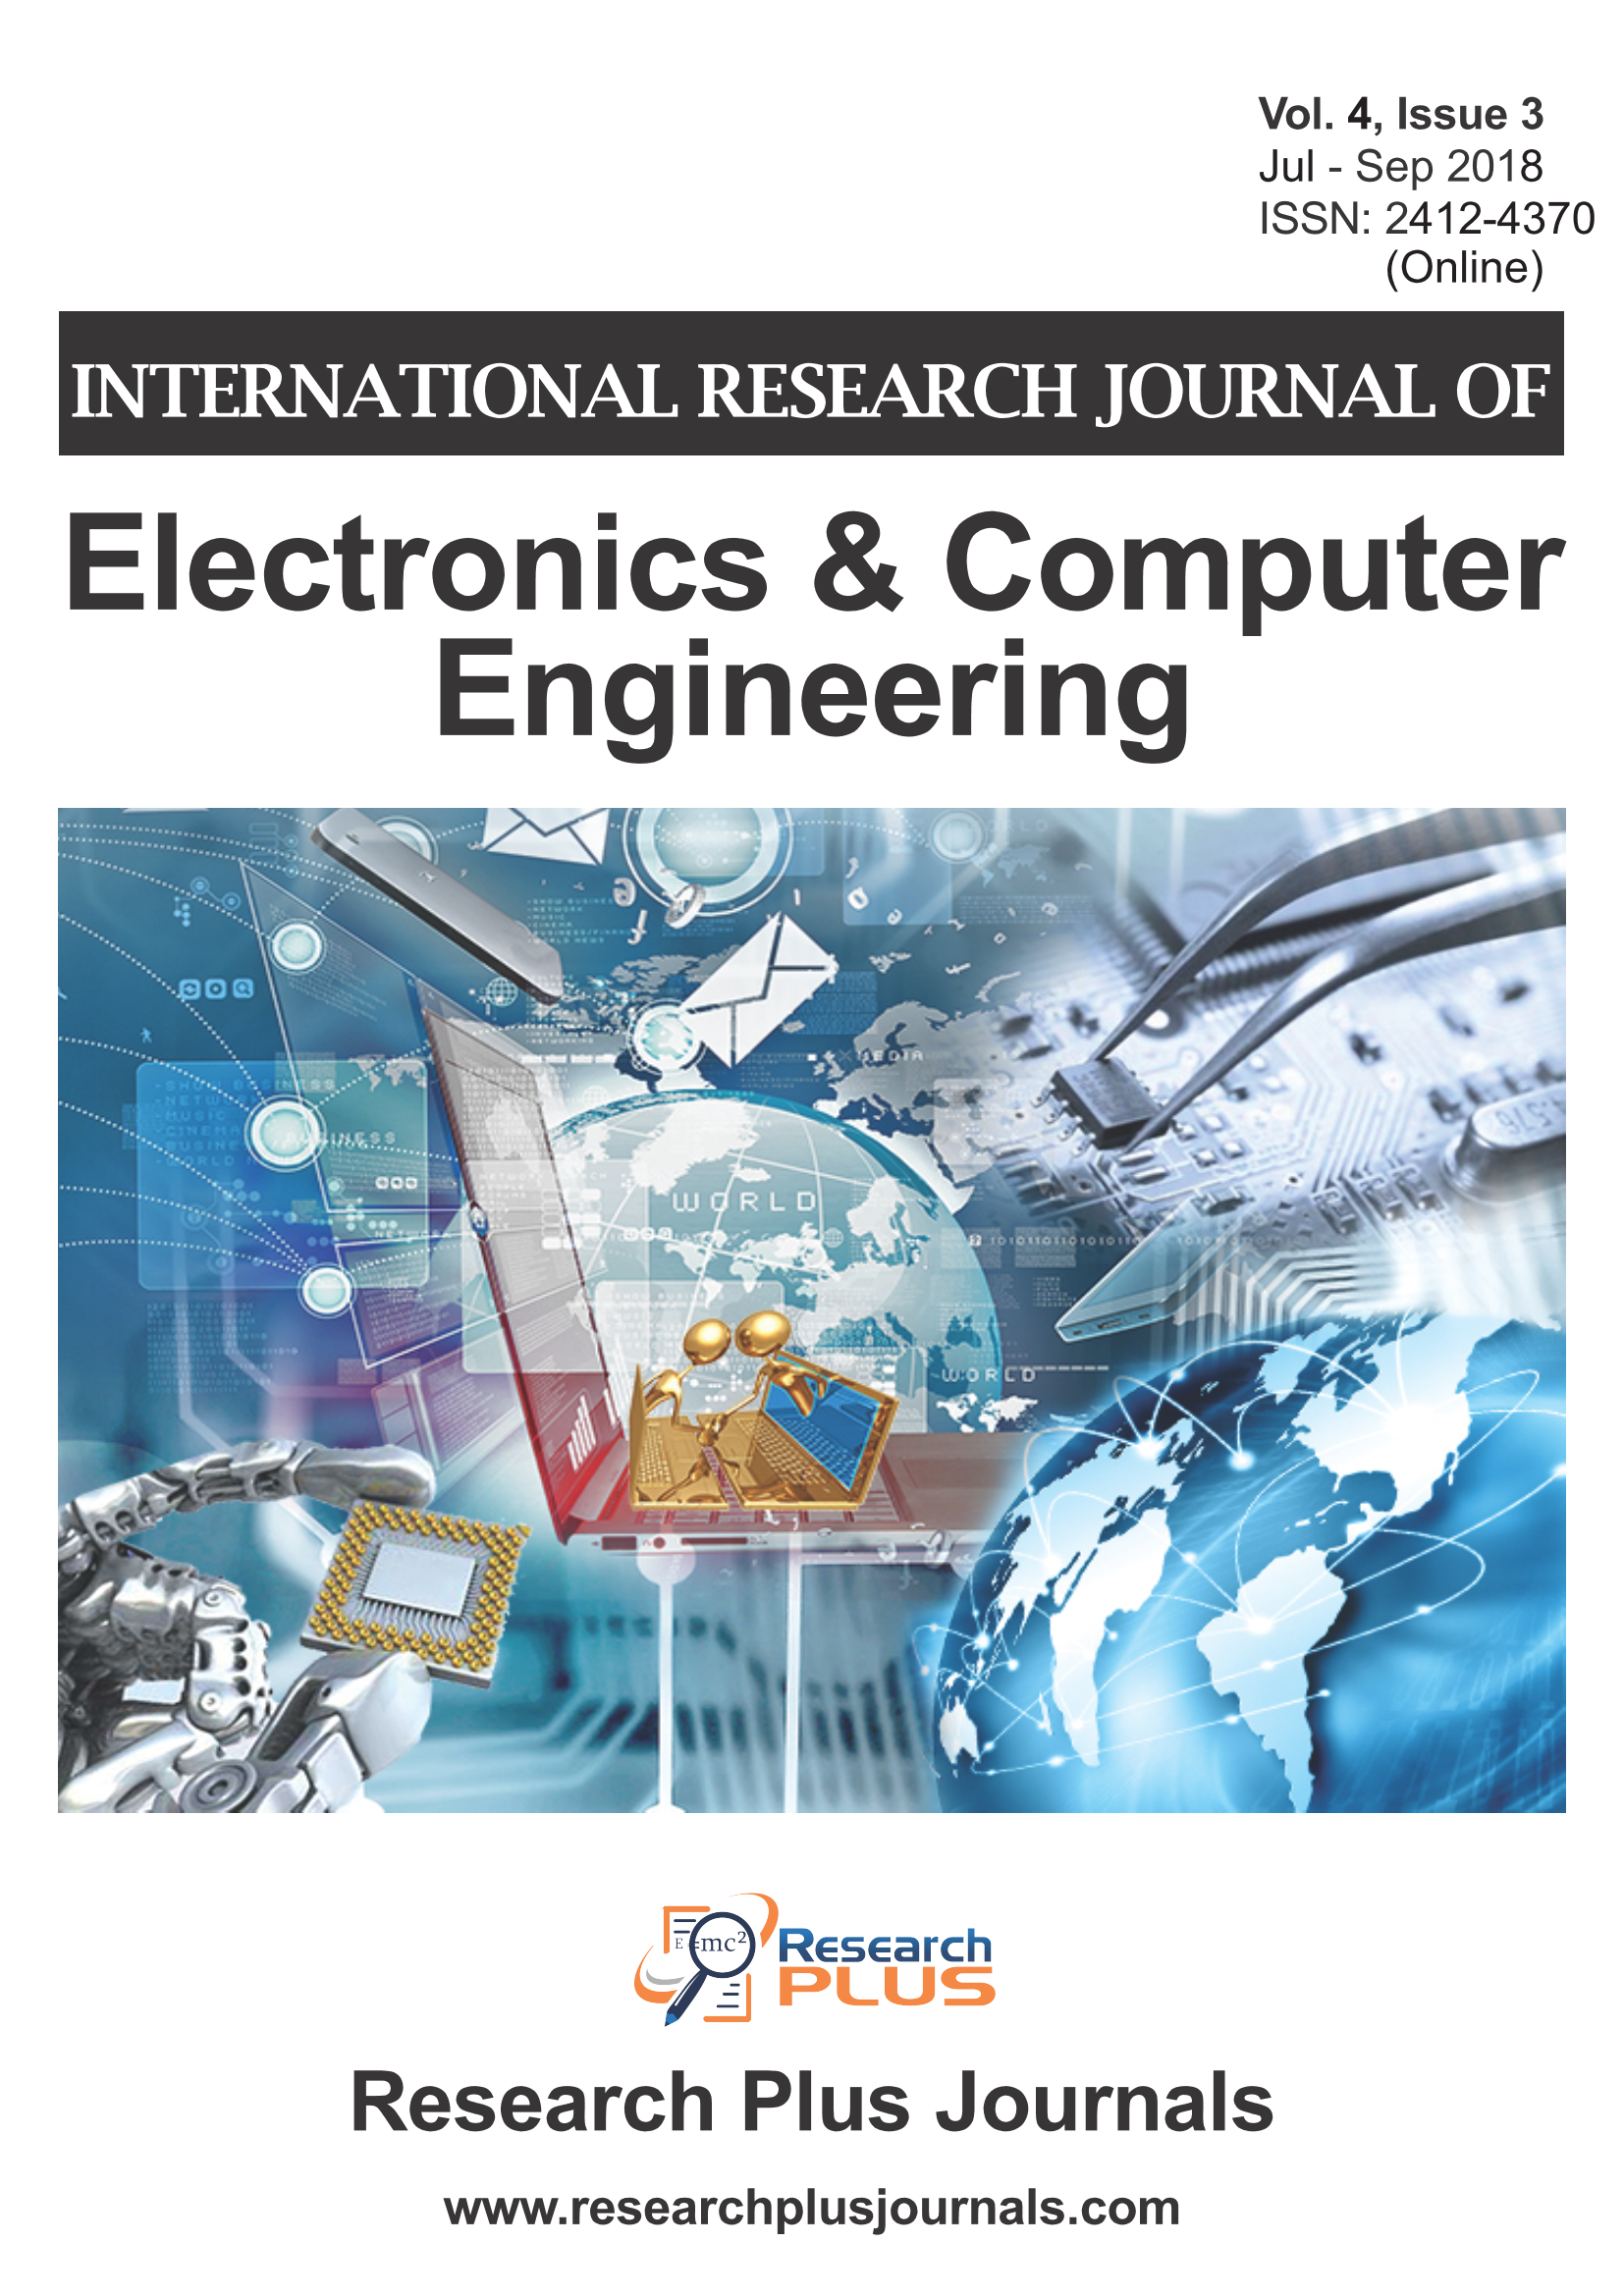 Volume 4, Issue 3, International Research Journal of Electronics & Computer Engineering (IRJECE) (Online ISSN : 2412-4370)